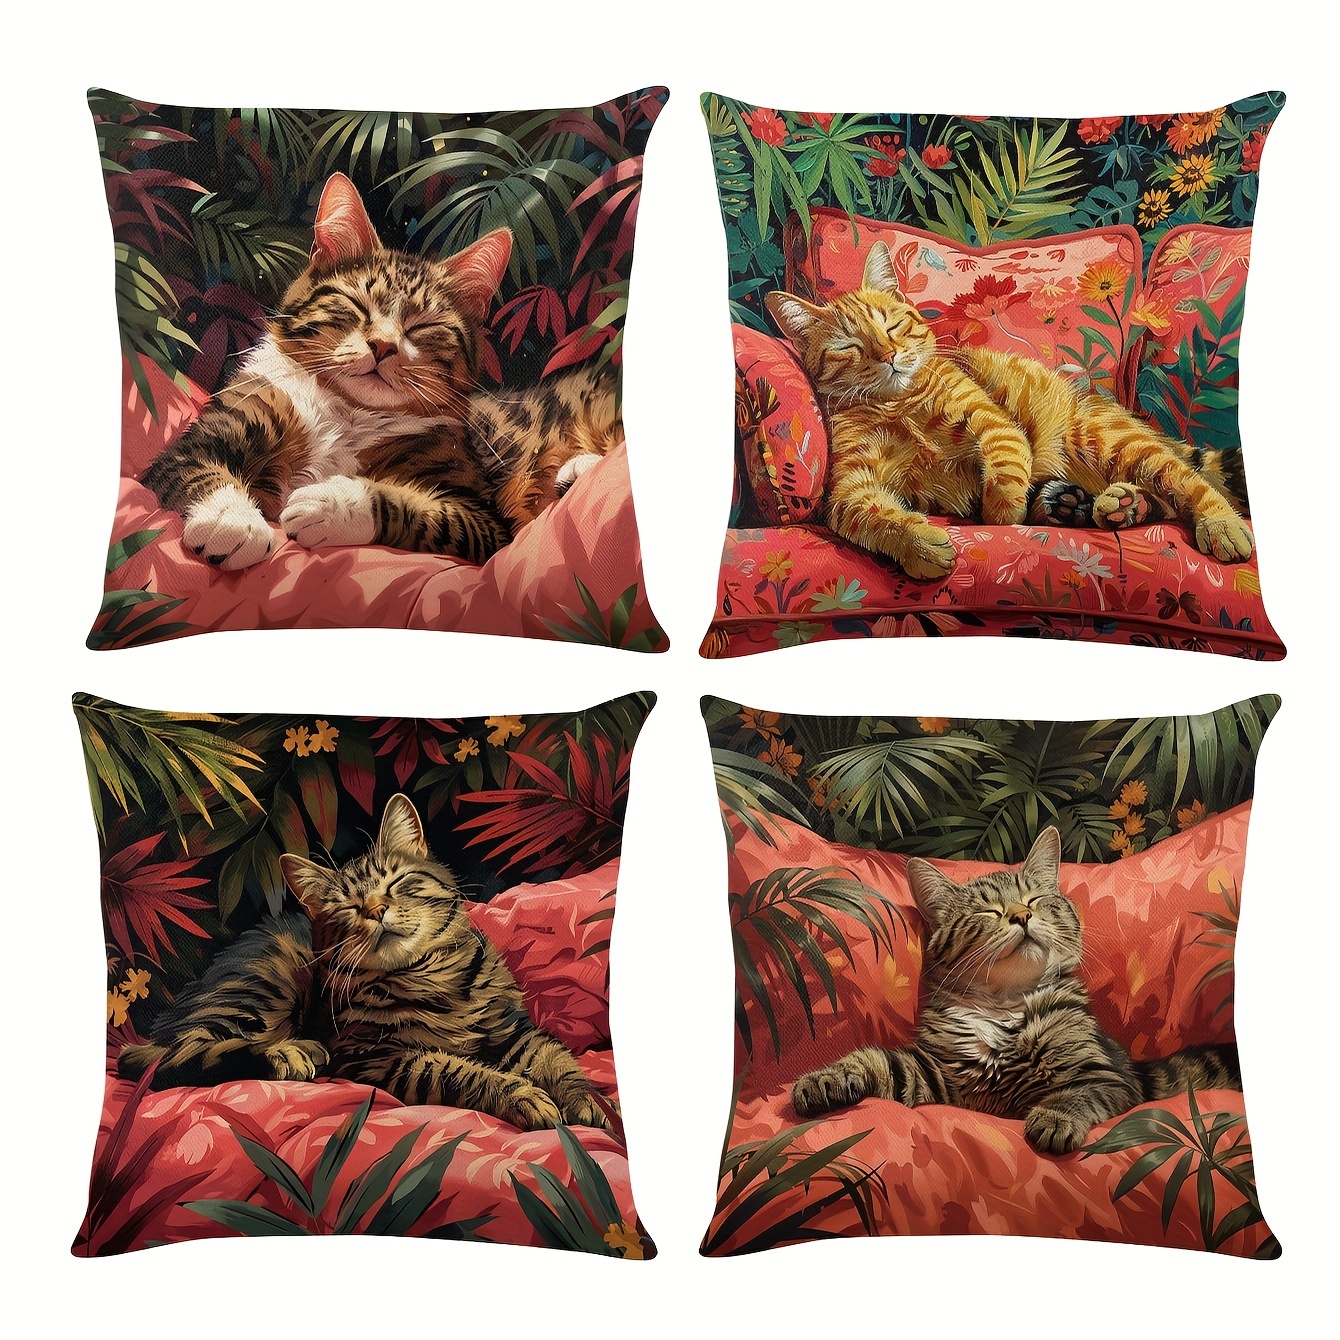 

Tropical Style Cat Pattern Linen Throw Pillow Covers Set Of 4, Machine Washable Zippered Cushion Cases For Various Room Types, Decorative Knit Fabric Pillowcases 17x17 Inches (no Insert)